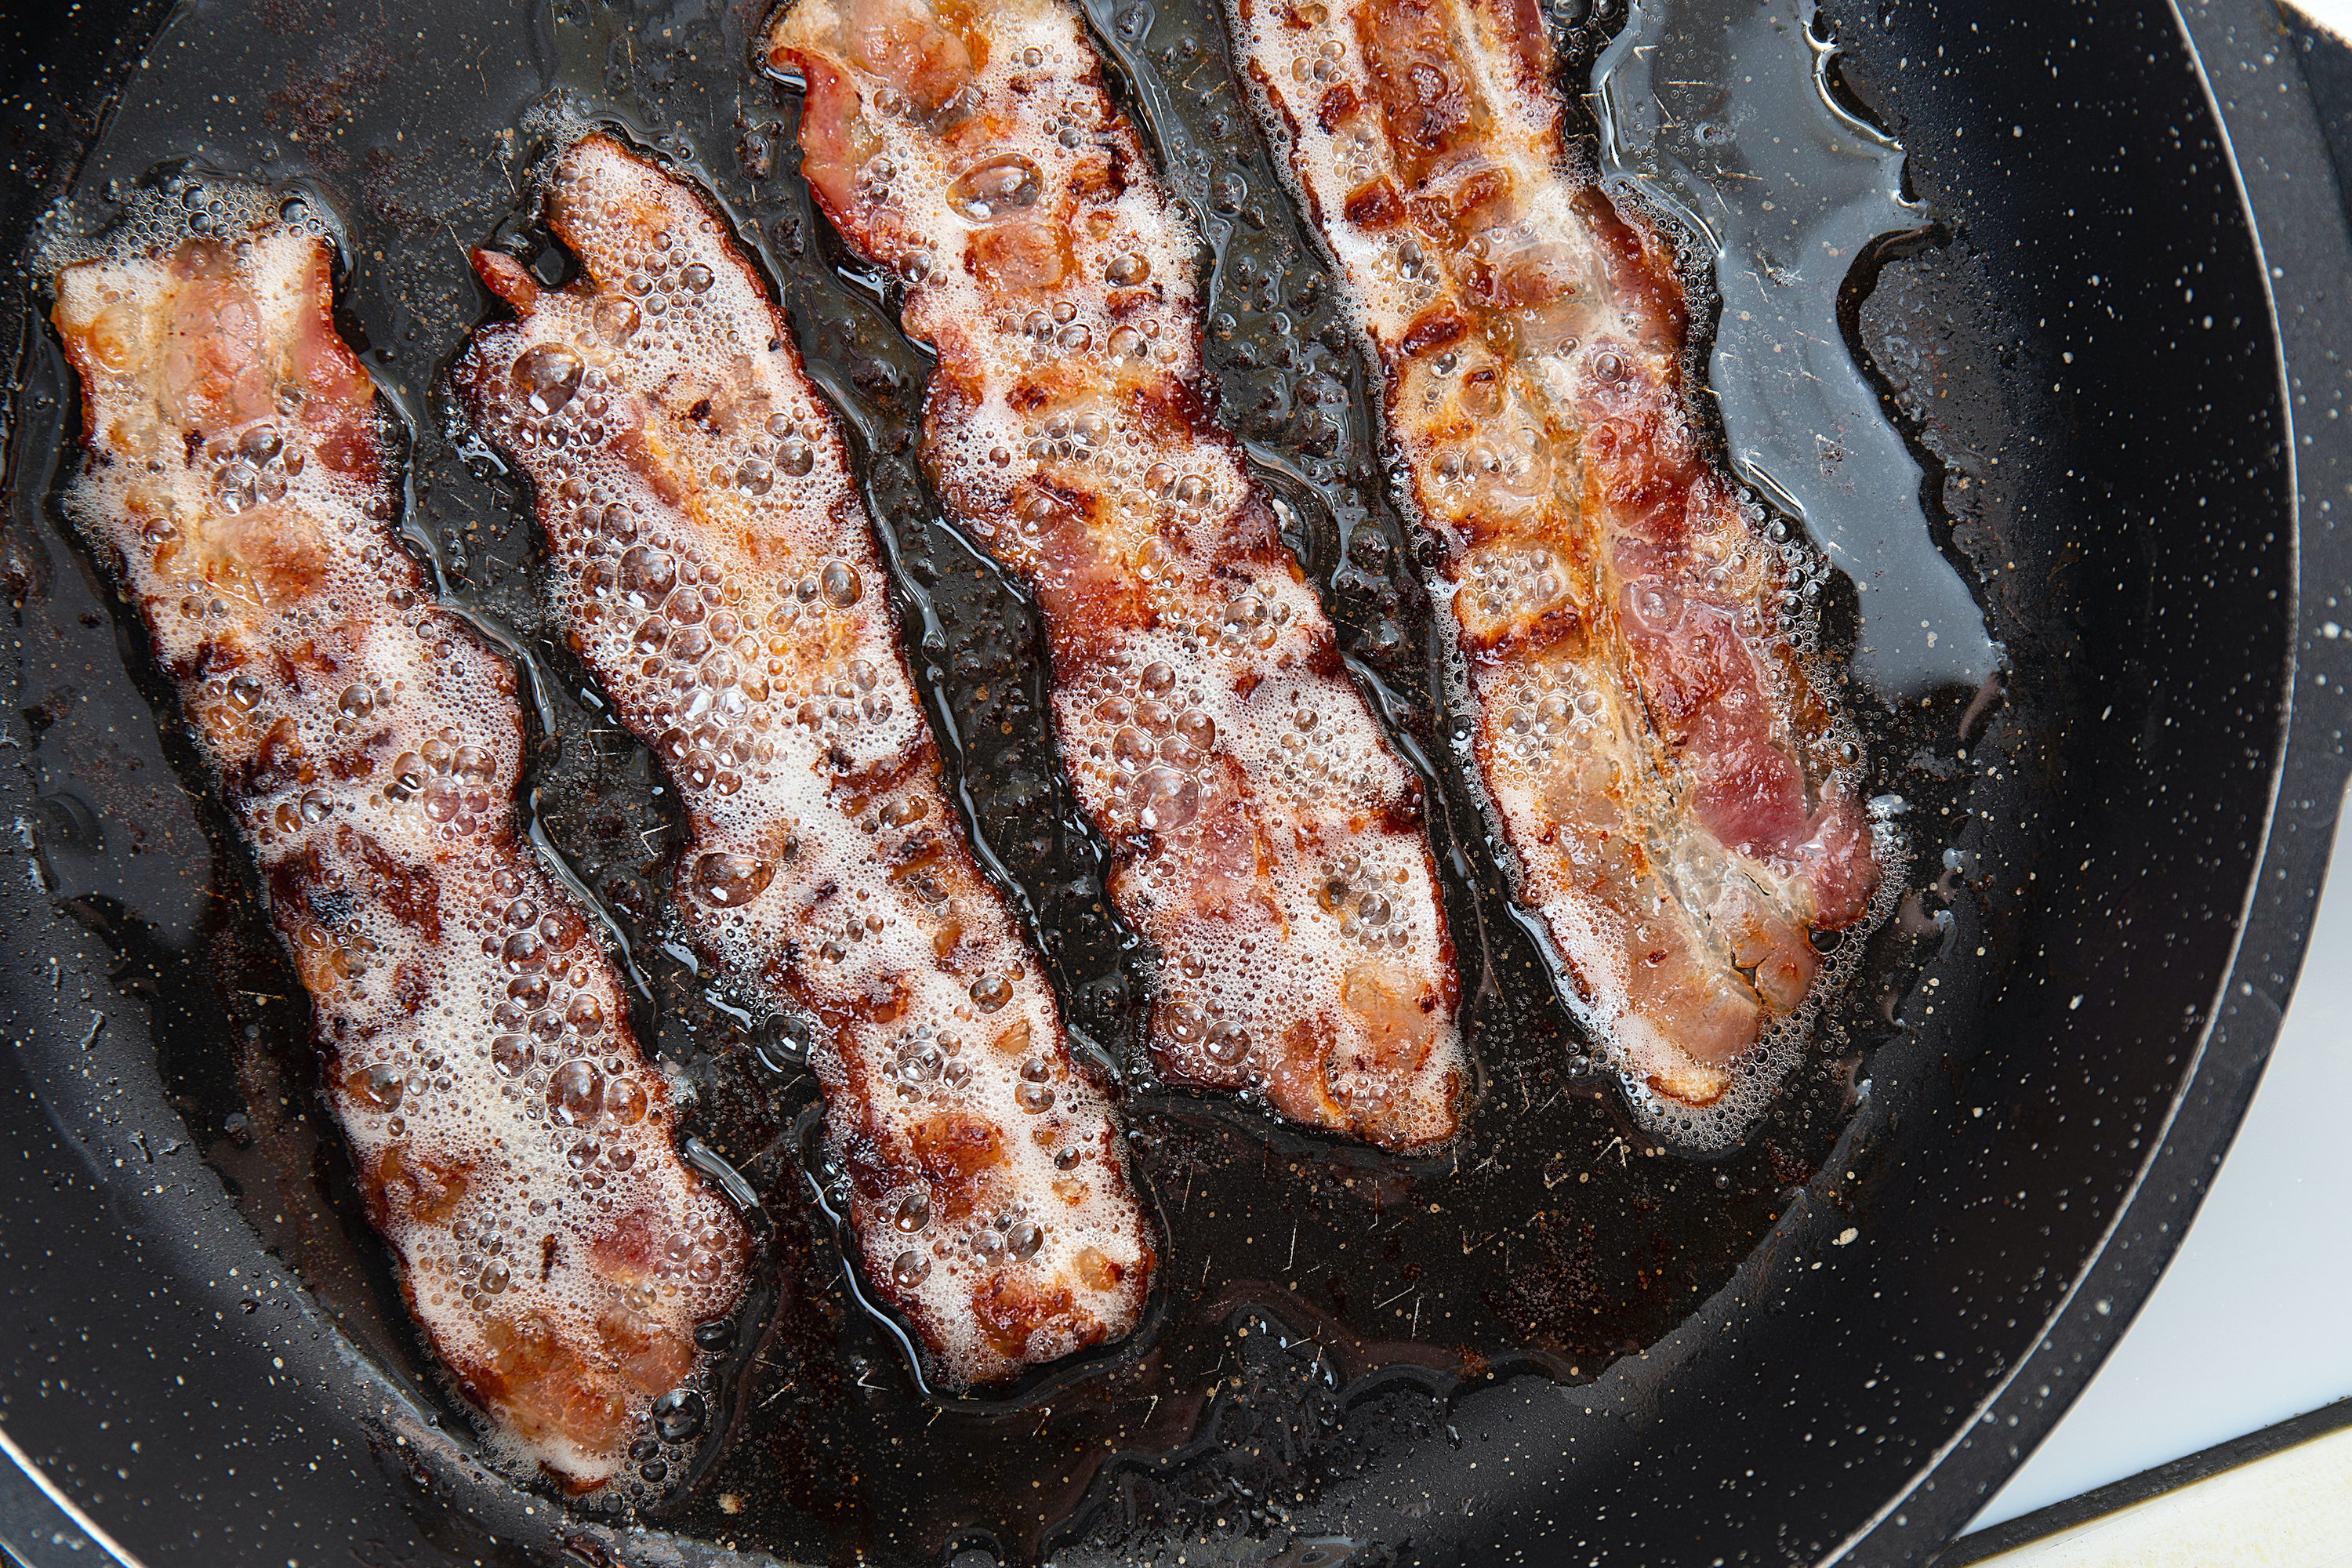 A Freezer Alarm Could Save Your Bacon - Good Cheap Eats